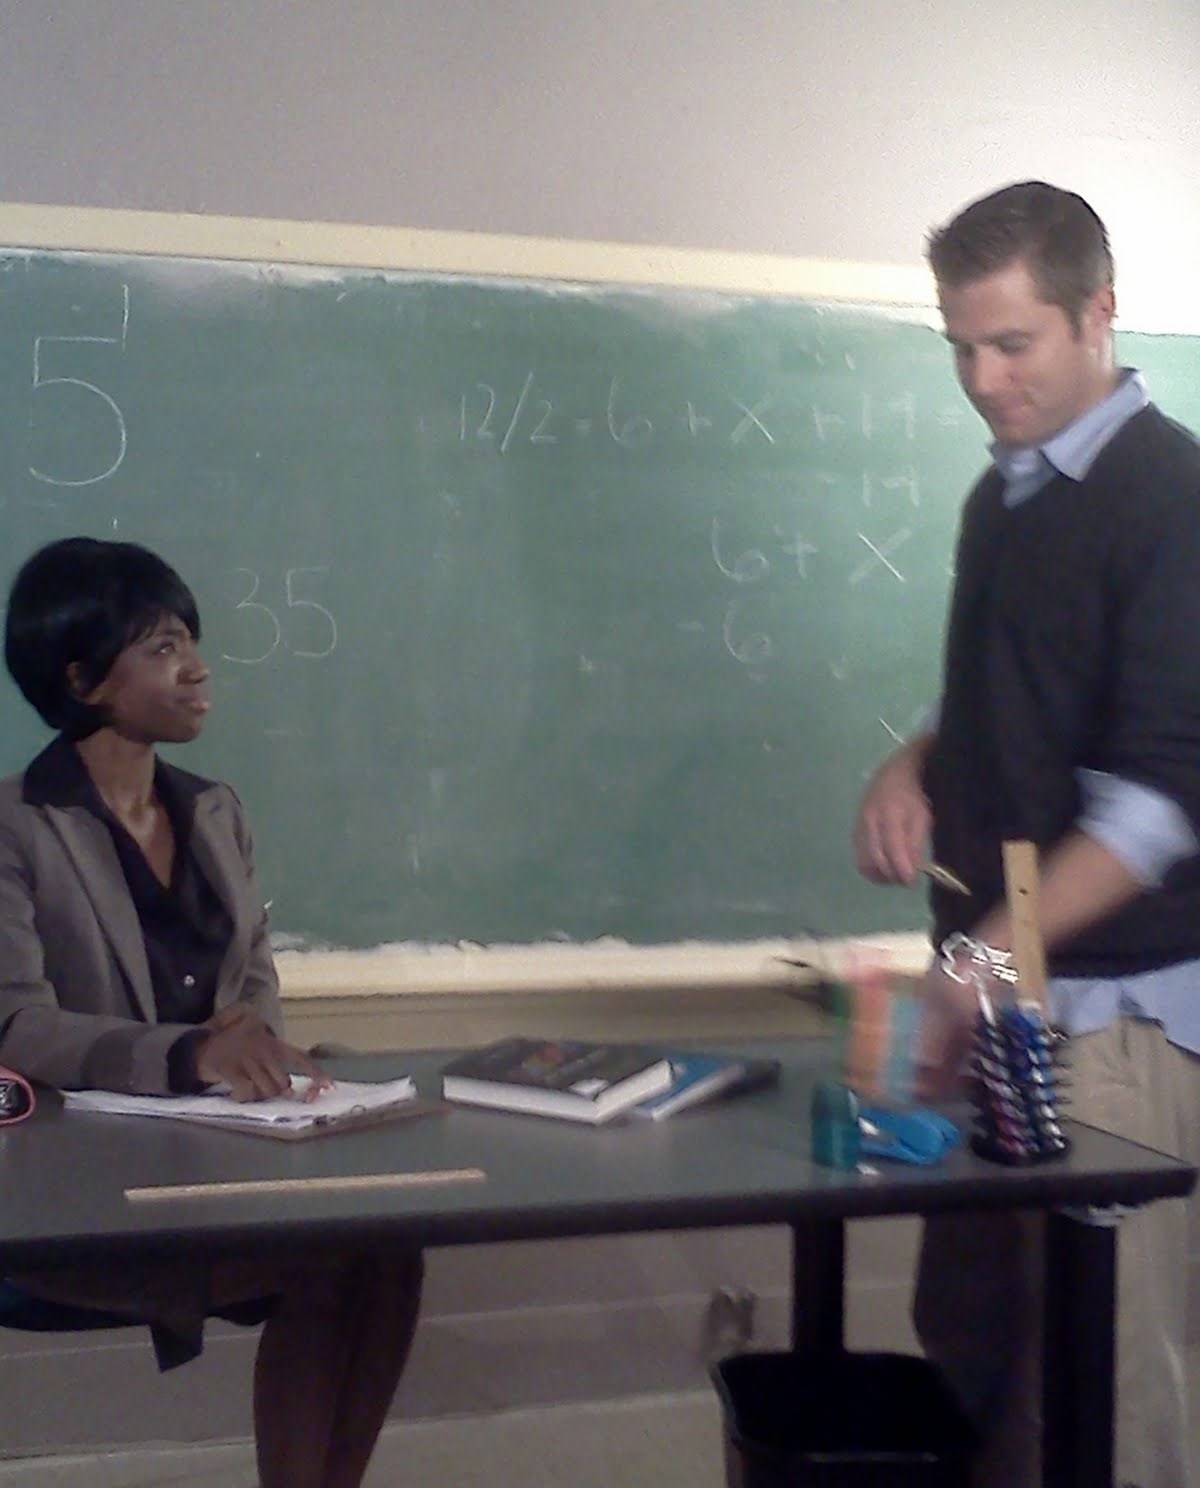 Ameona Almund on set as Sofie Premise in the film Dear Marcus Luke...In scene Kyle Lewis as Mr. Smith